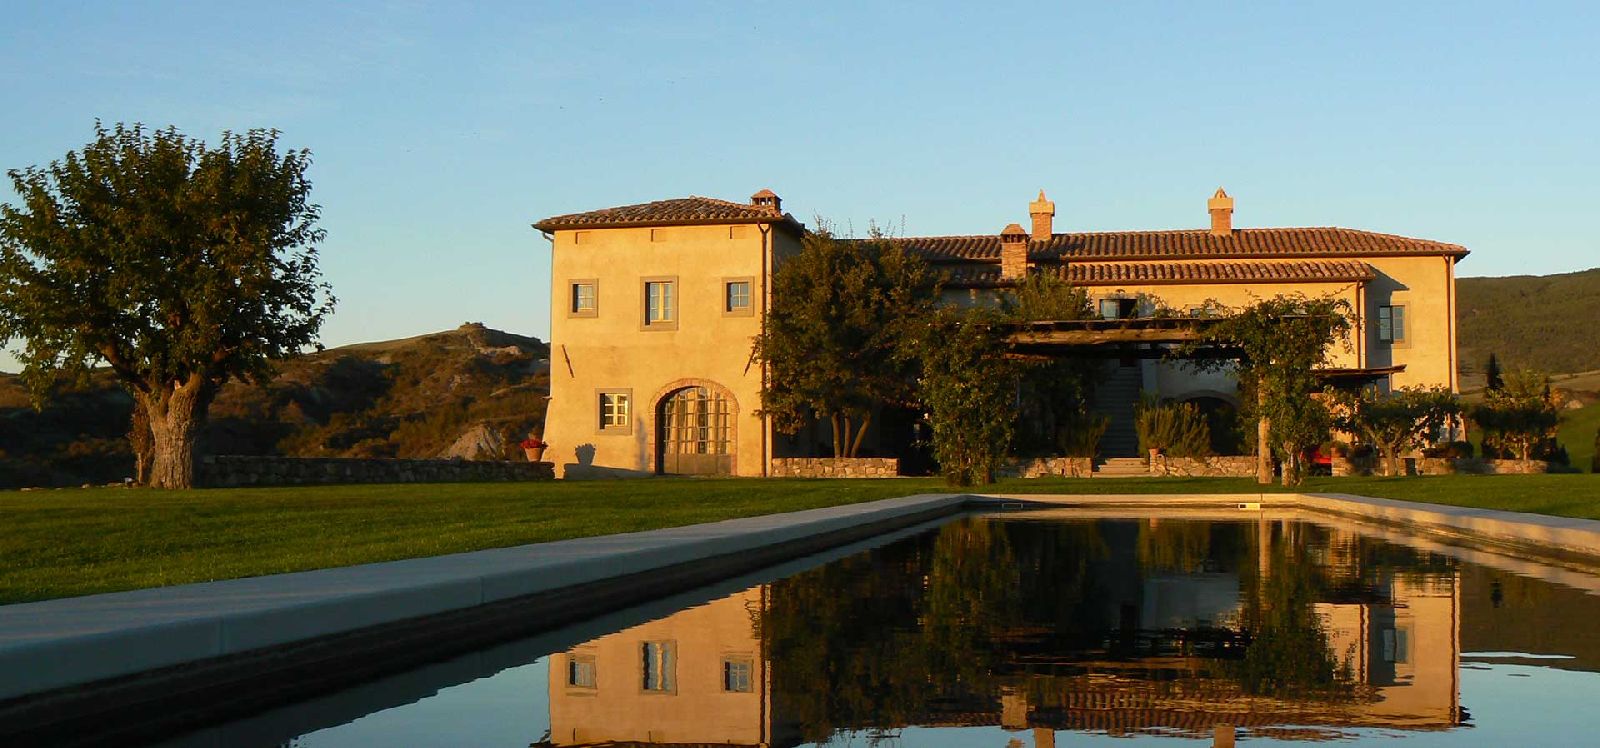 Villa d'Orcia in Tuscany reflected in swimming pool at sunset